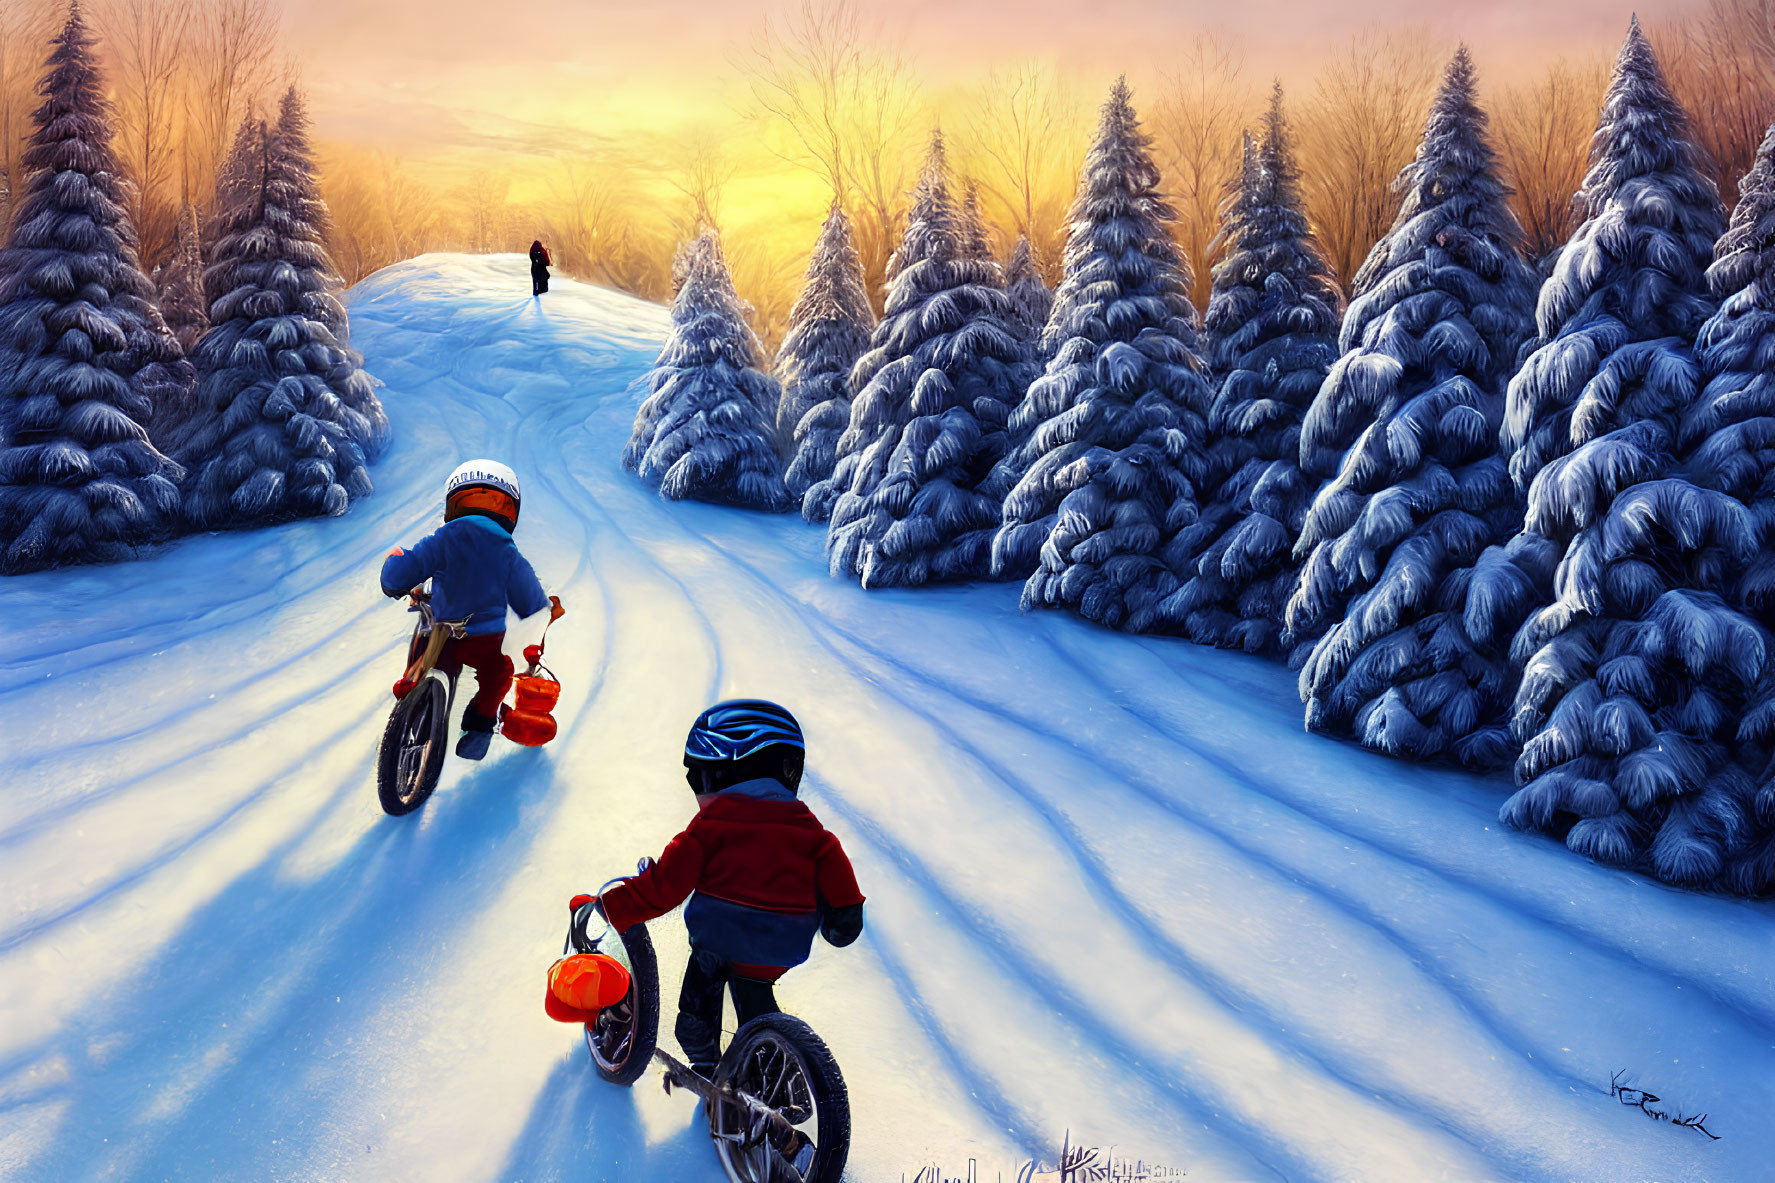 Children biking in snowy winter forest with sun rays and figure walking